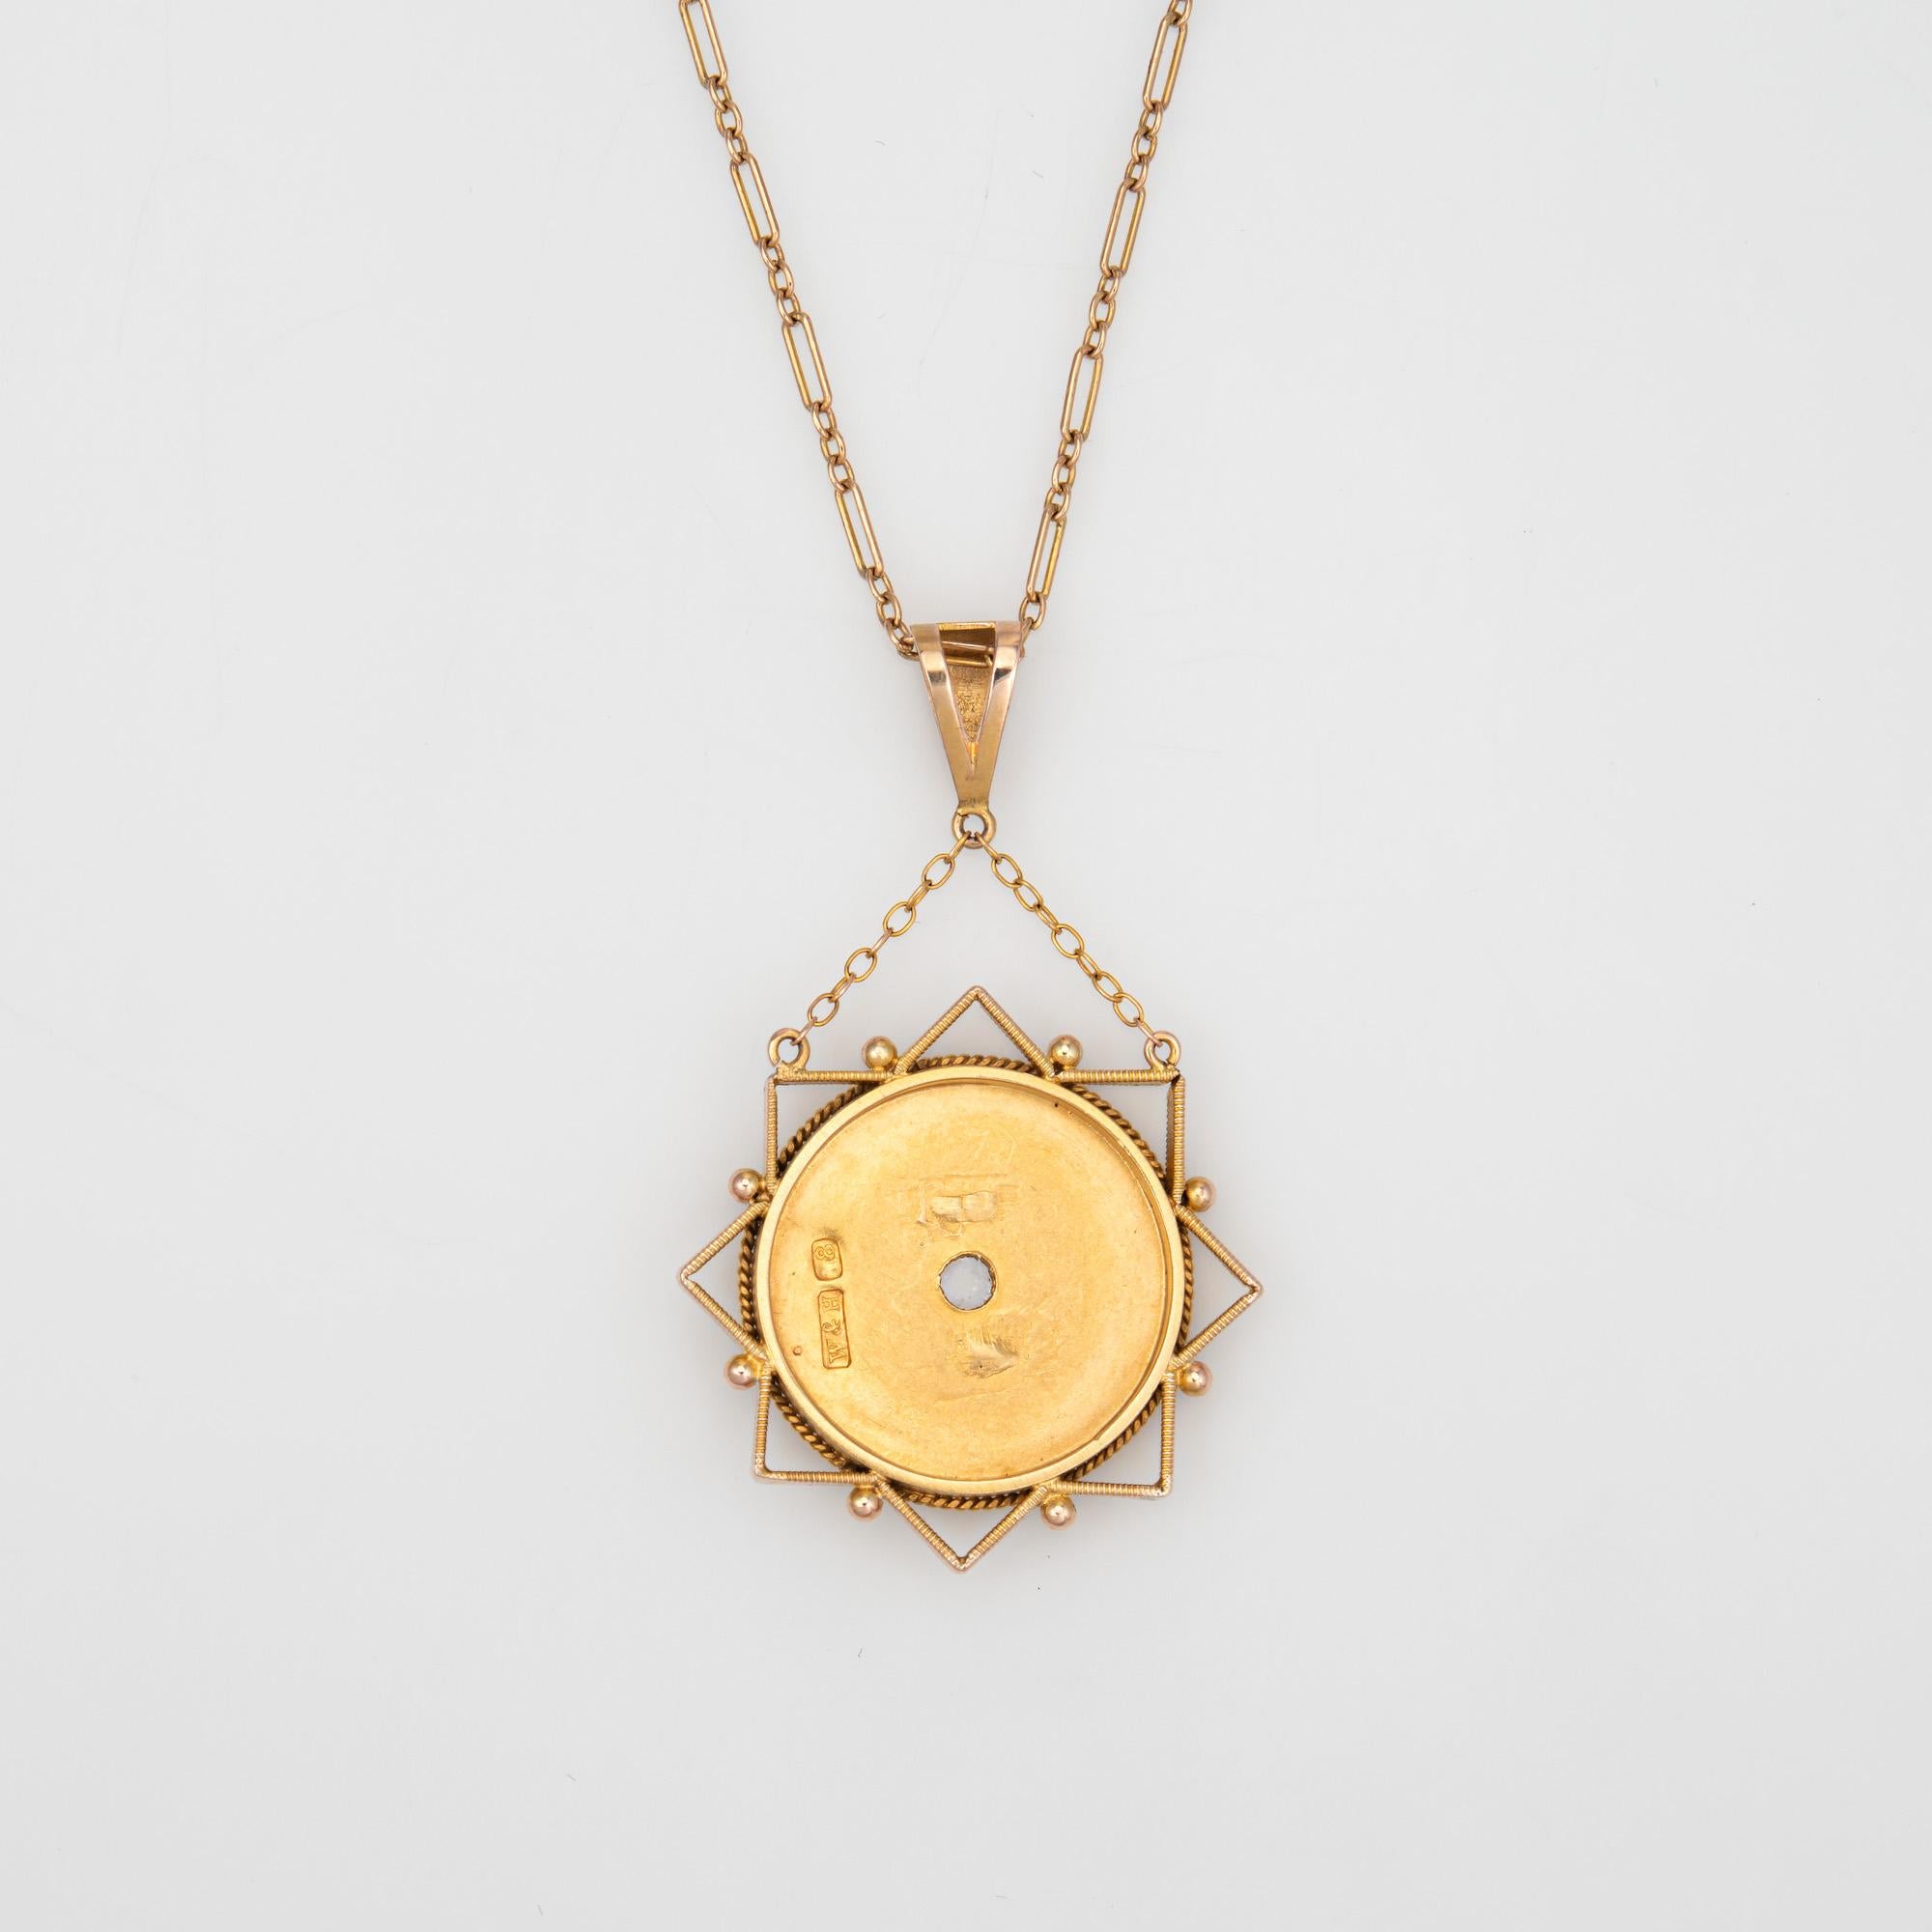 Finely detailed antique Victorian diamond star necklace (circa 1880s to 1900s), crafted in 18 karat yellow gold (pendant) and 10k yellow gold (chain). 

One estimated 0.05 carat old rose cut diamond is set to the center (estimated at J-K color and